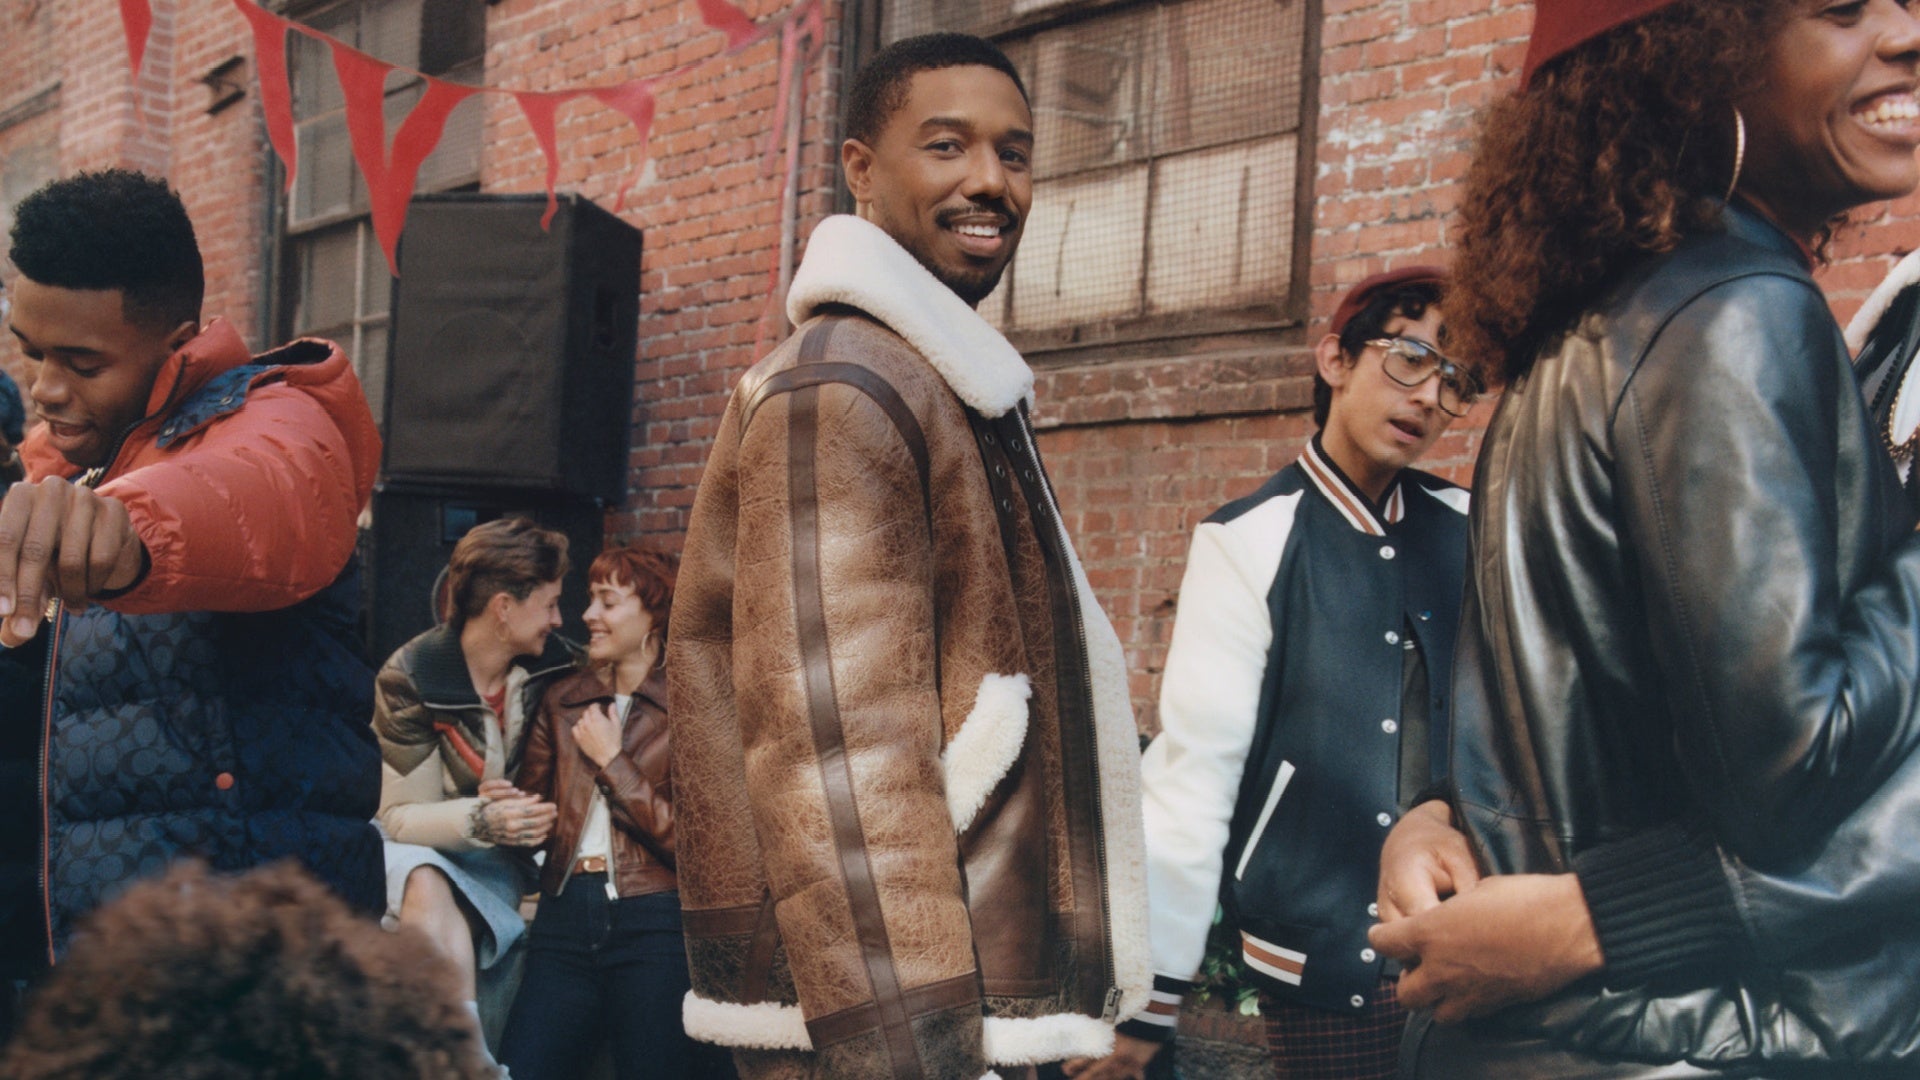 Michael B. Jordan Joins Coach's Fall Campaign To Show The Importance Of Being "With Friends" – EXCLUSIVE